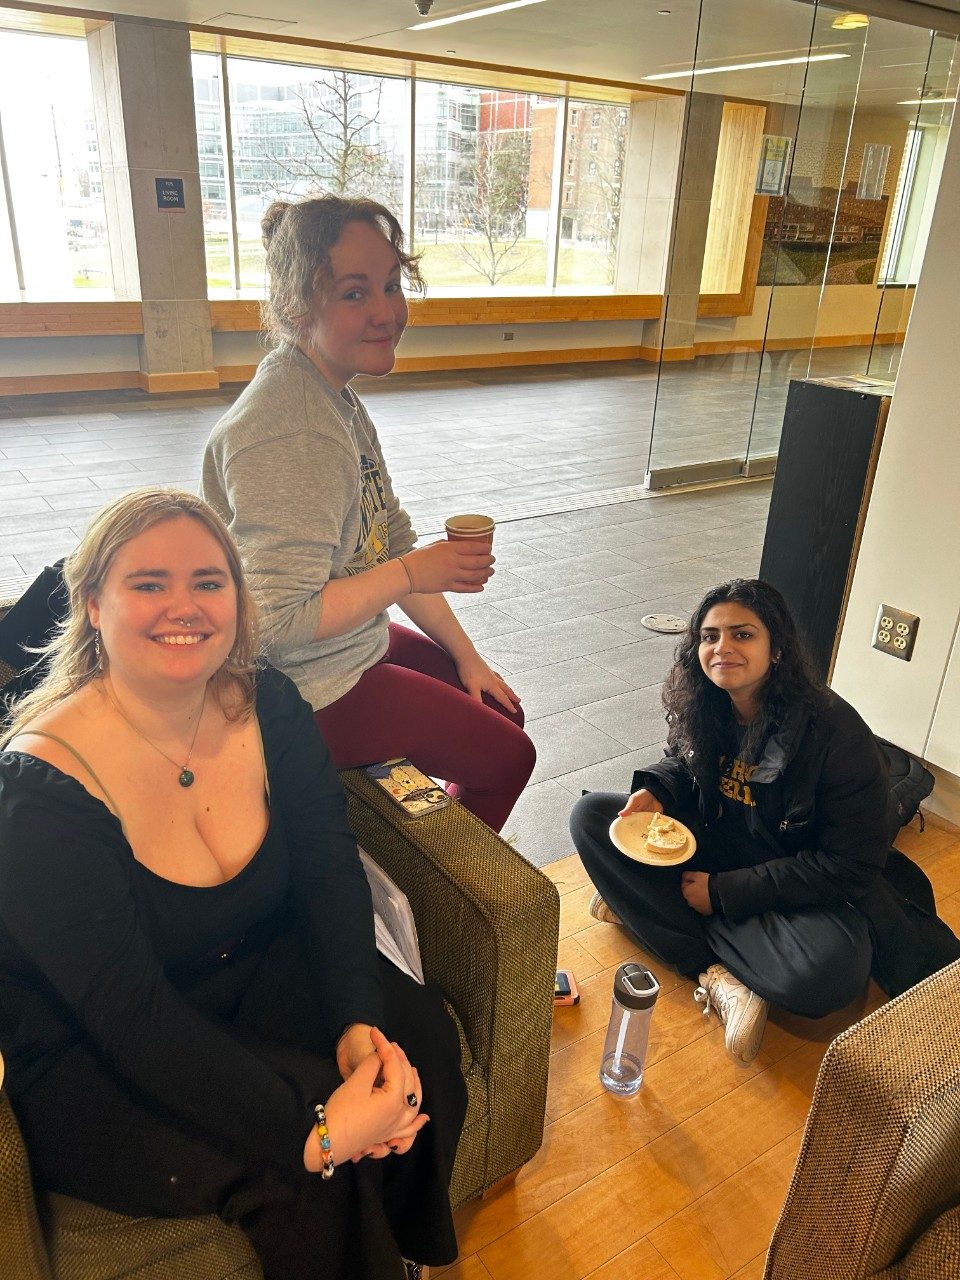 Three students are pictured having tea in a lounge at Alice Lloyd Hall. They are all smiling at the camera.